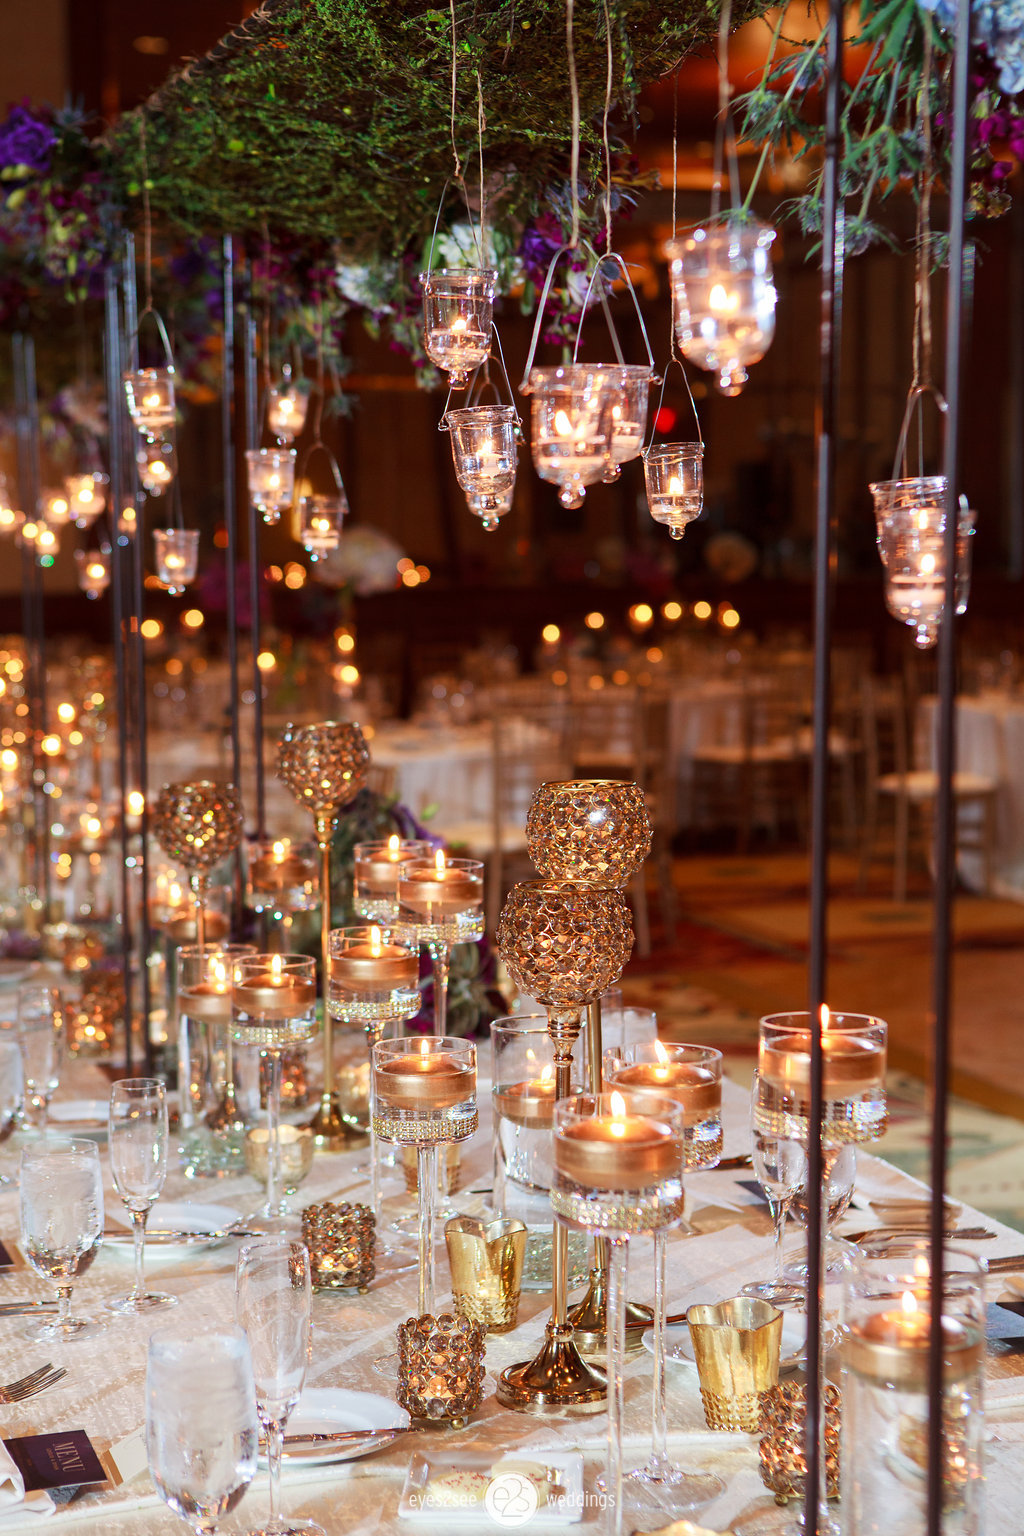 Trellis and Candles on head table